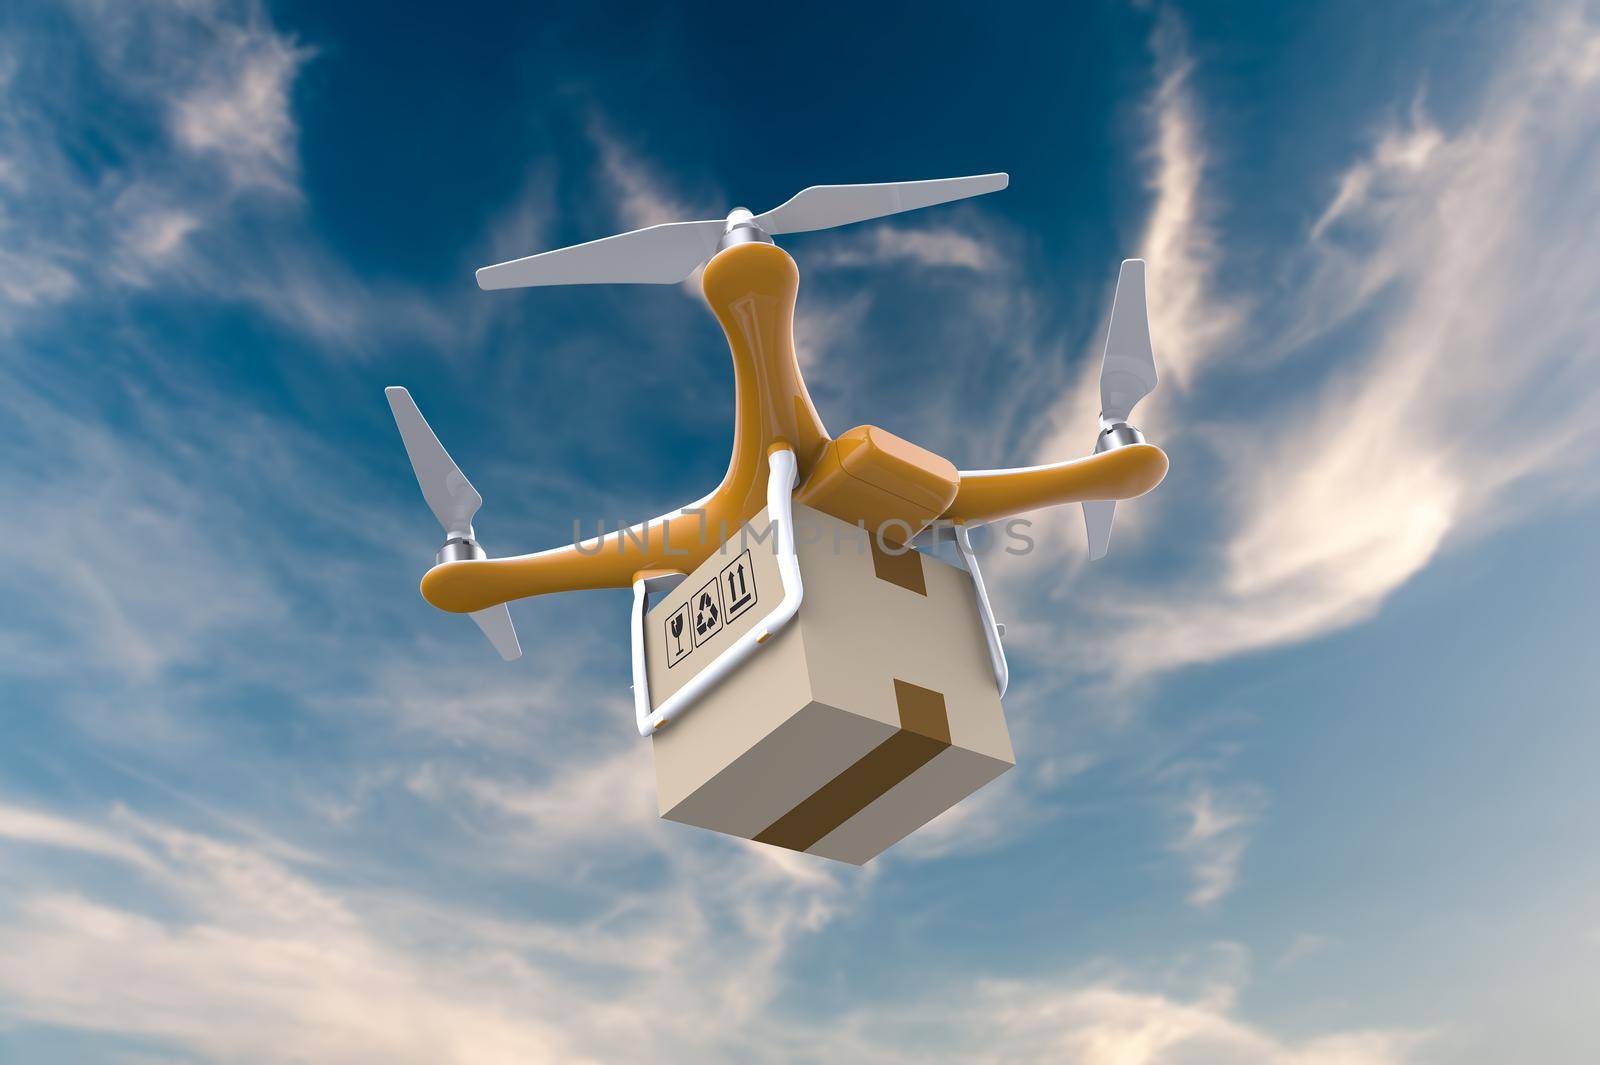 Drone flying with a delivery box package in the sky by cla78